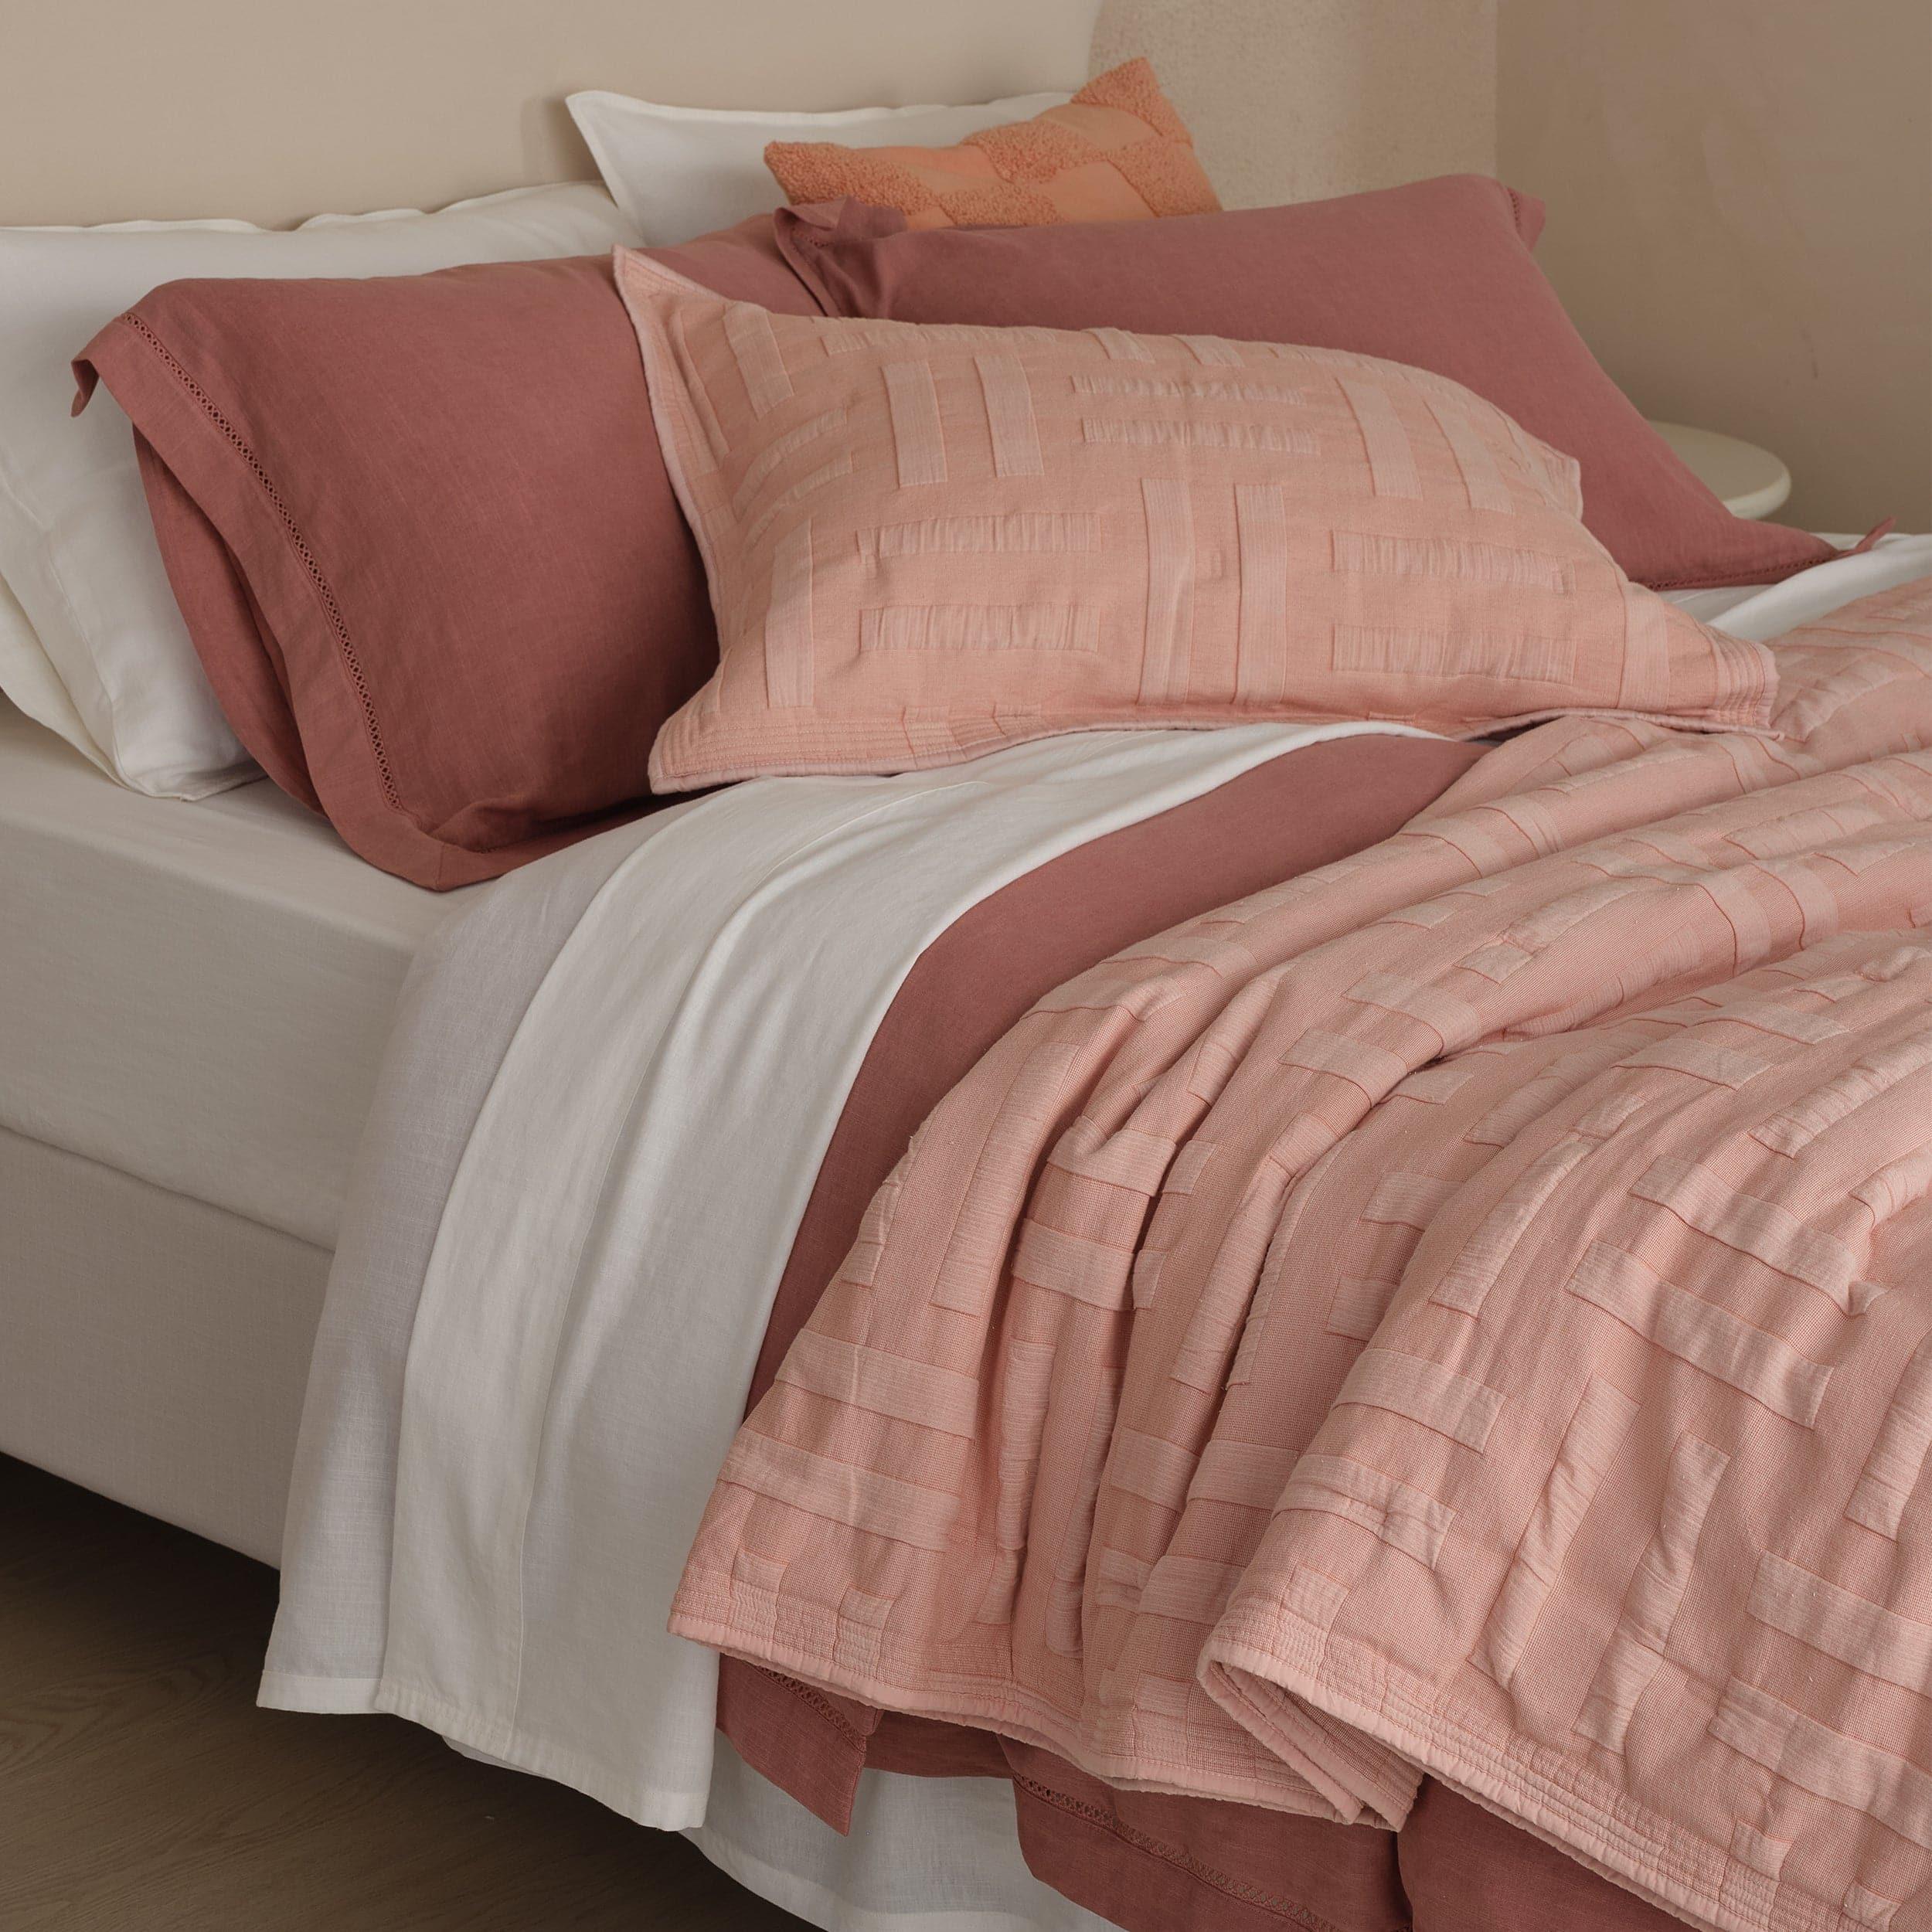 Transform your bedroom into a tranquil oasis with our exquisite queen size quilt sets.